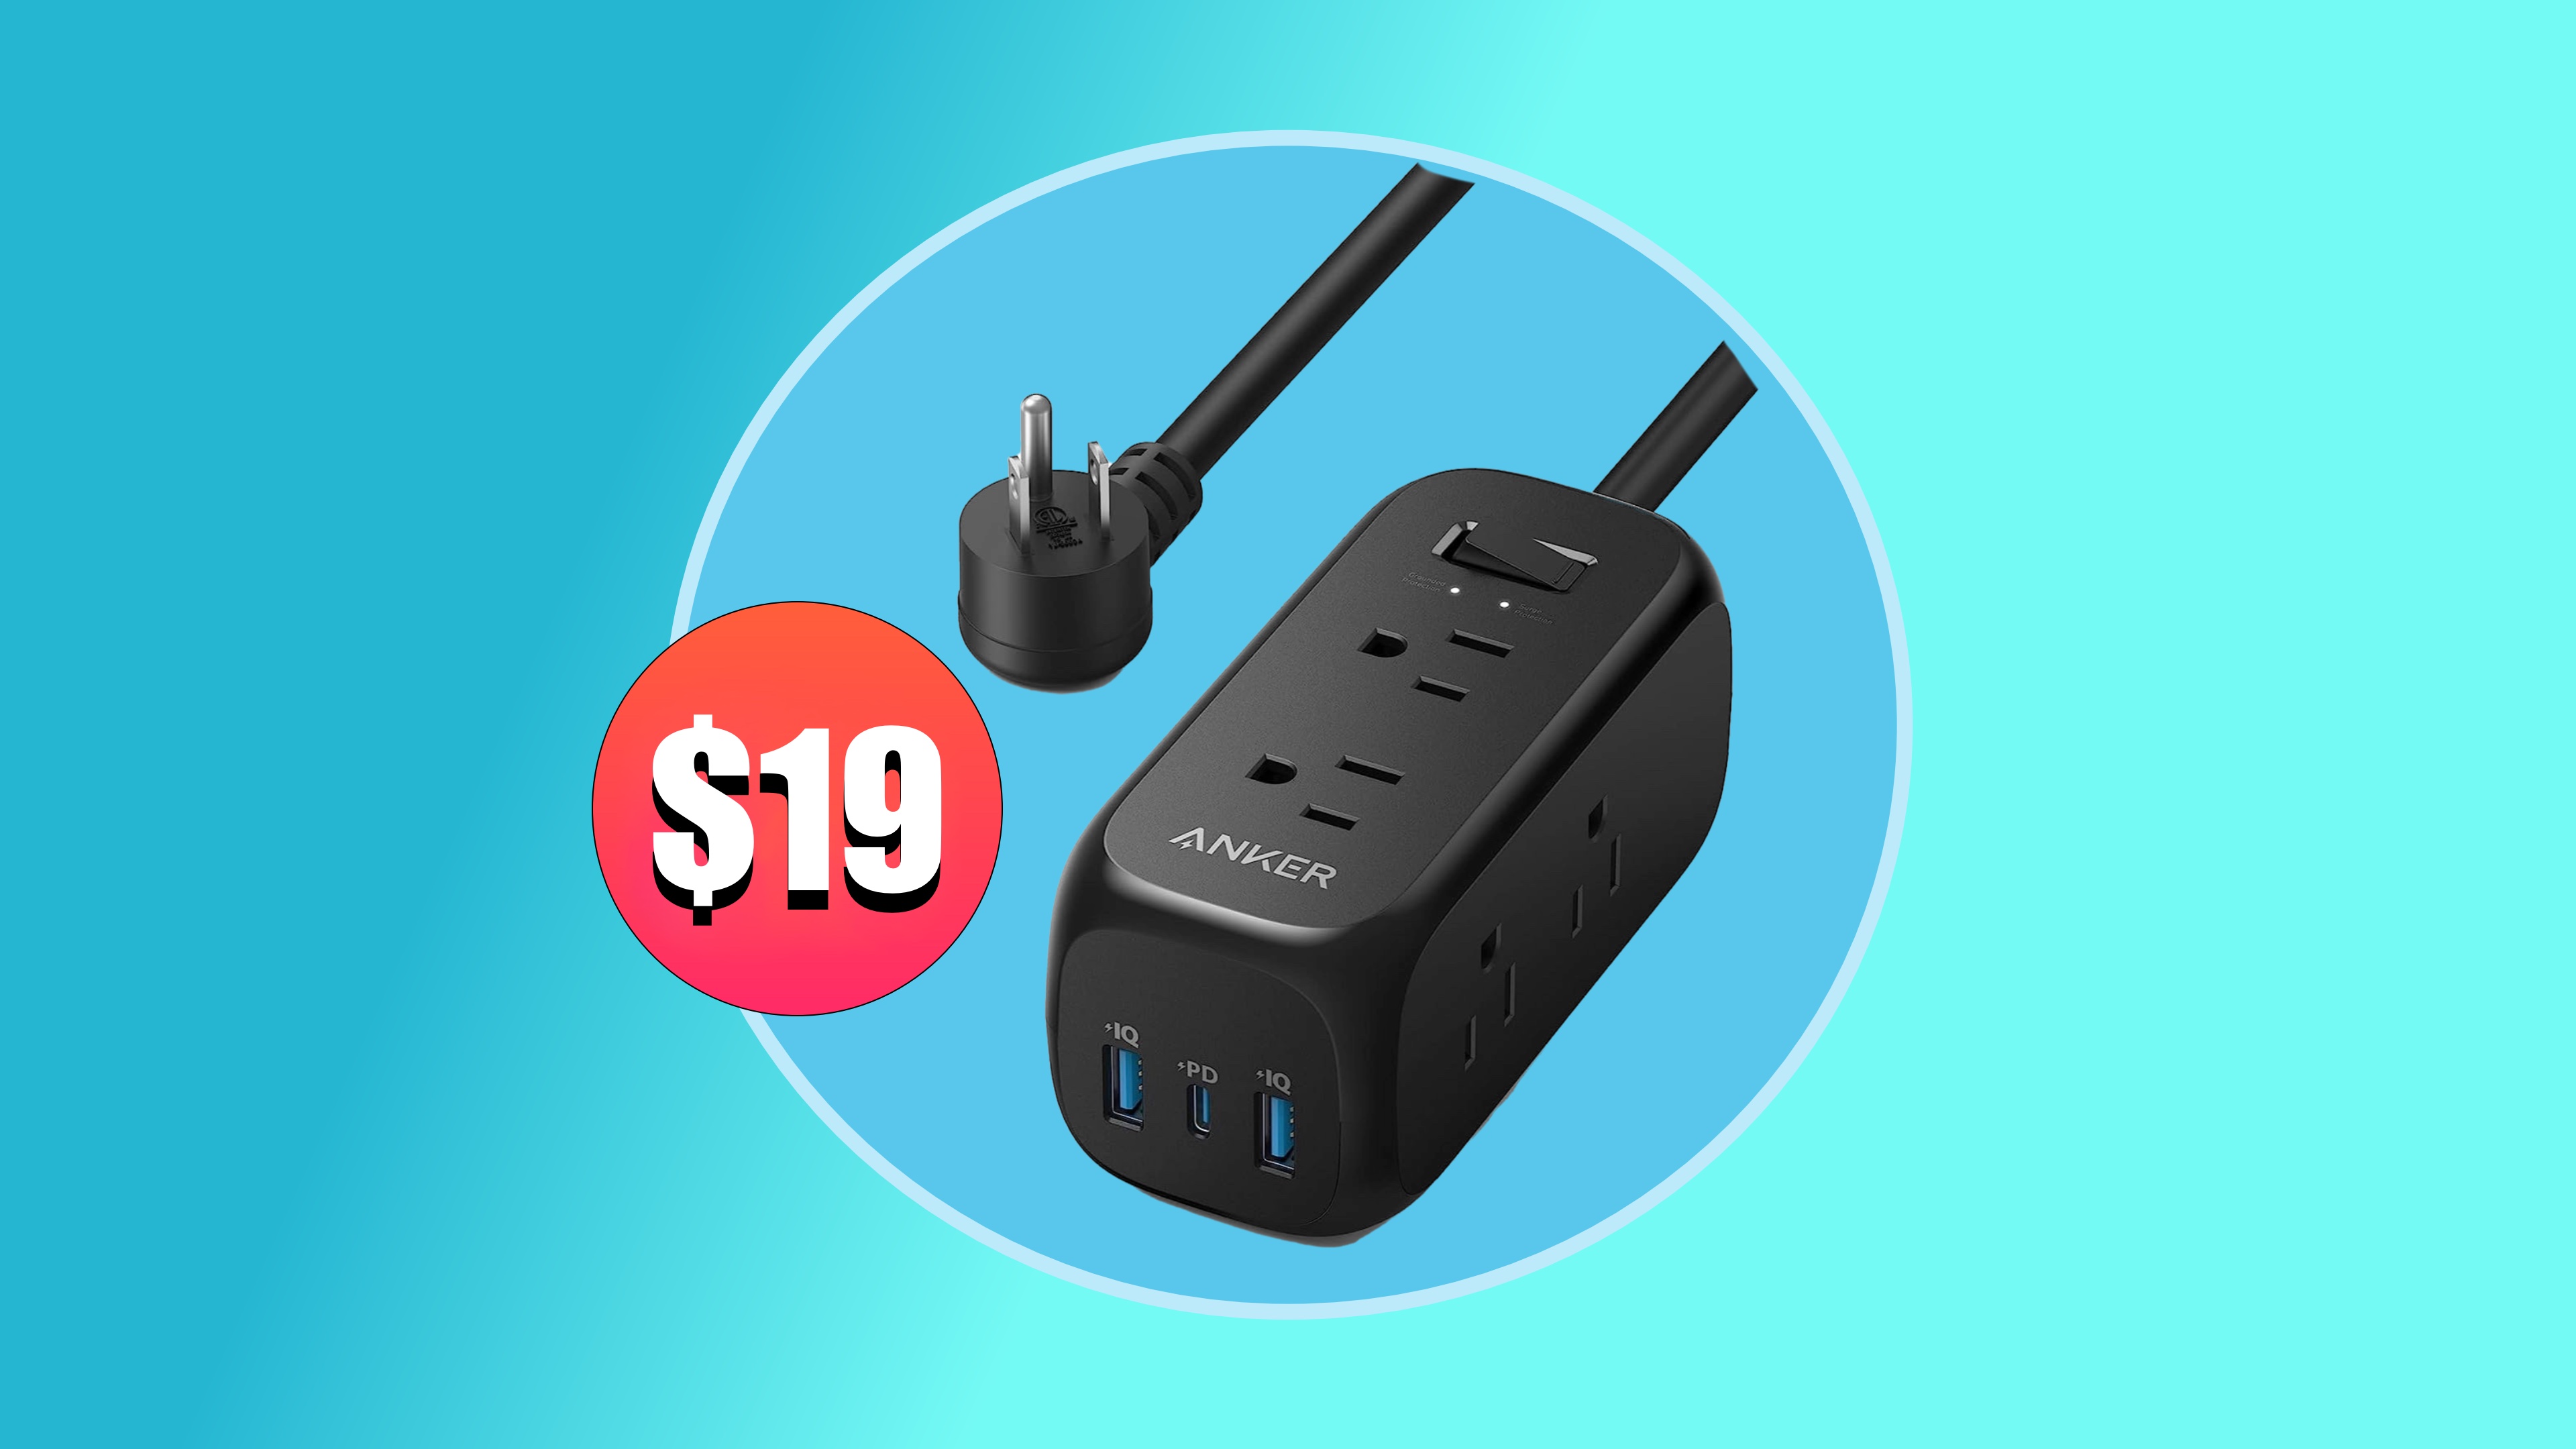 Get Anker’s handy 9-in-1 USB-C power strip for just $19